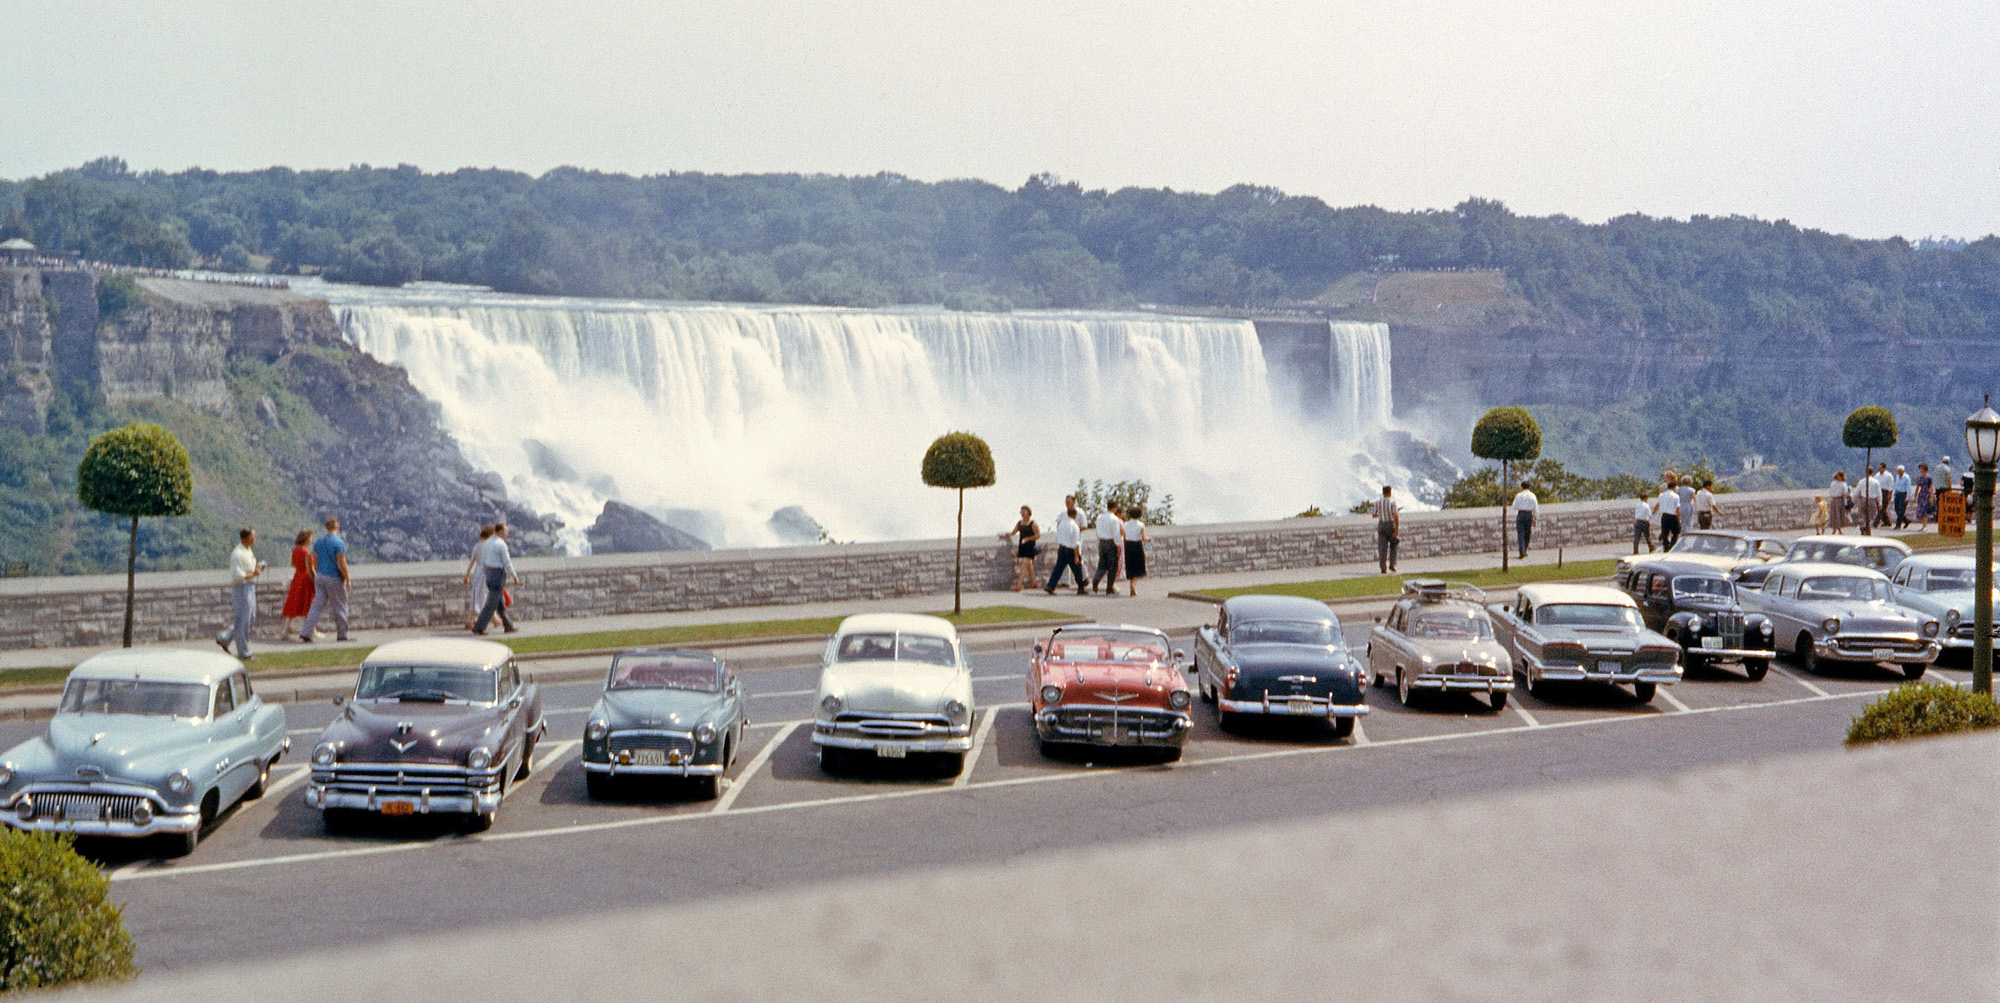 Shot taken using 35mm Kodachrome on the Canadian side of the Falls in 1958. Note the array of British and French cars among the American classics in the parking lot. Today, only tour buses are allowed in this area. The movie "Niagara," starring Marilyn Monroe, filmed the motel scenes (temporary props) off to the left of the picture at the gorge edge in 1954. View full size.